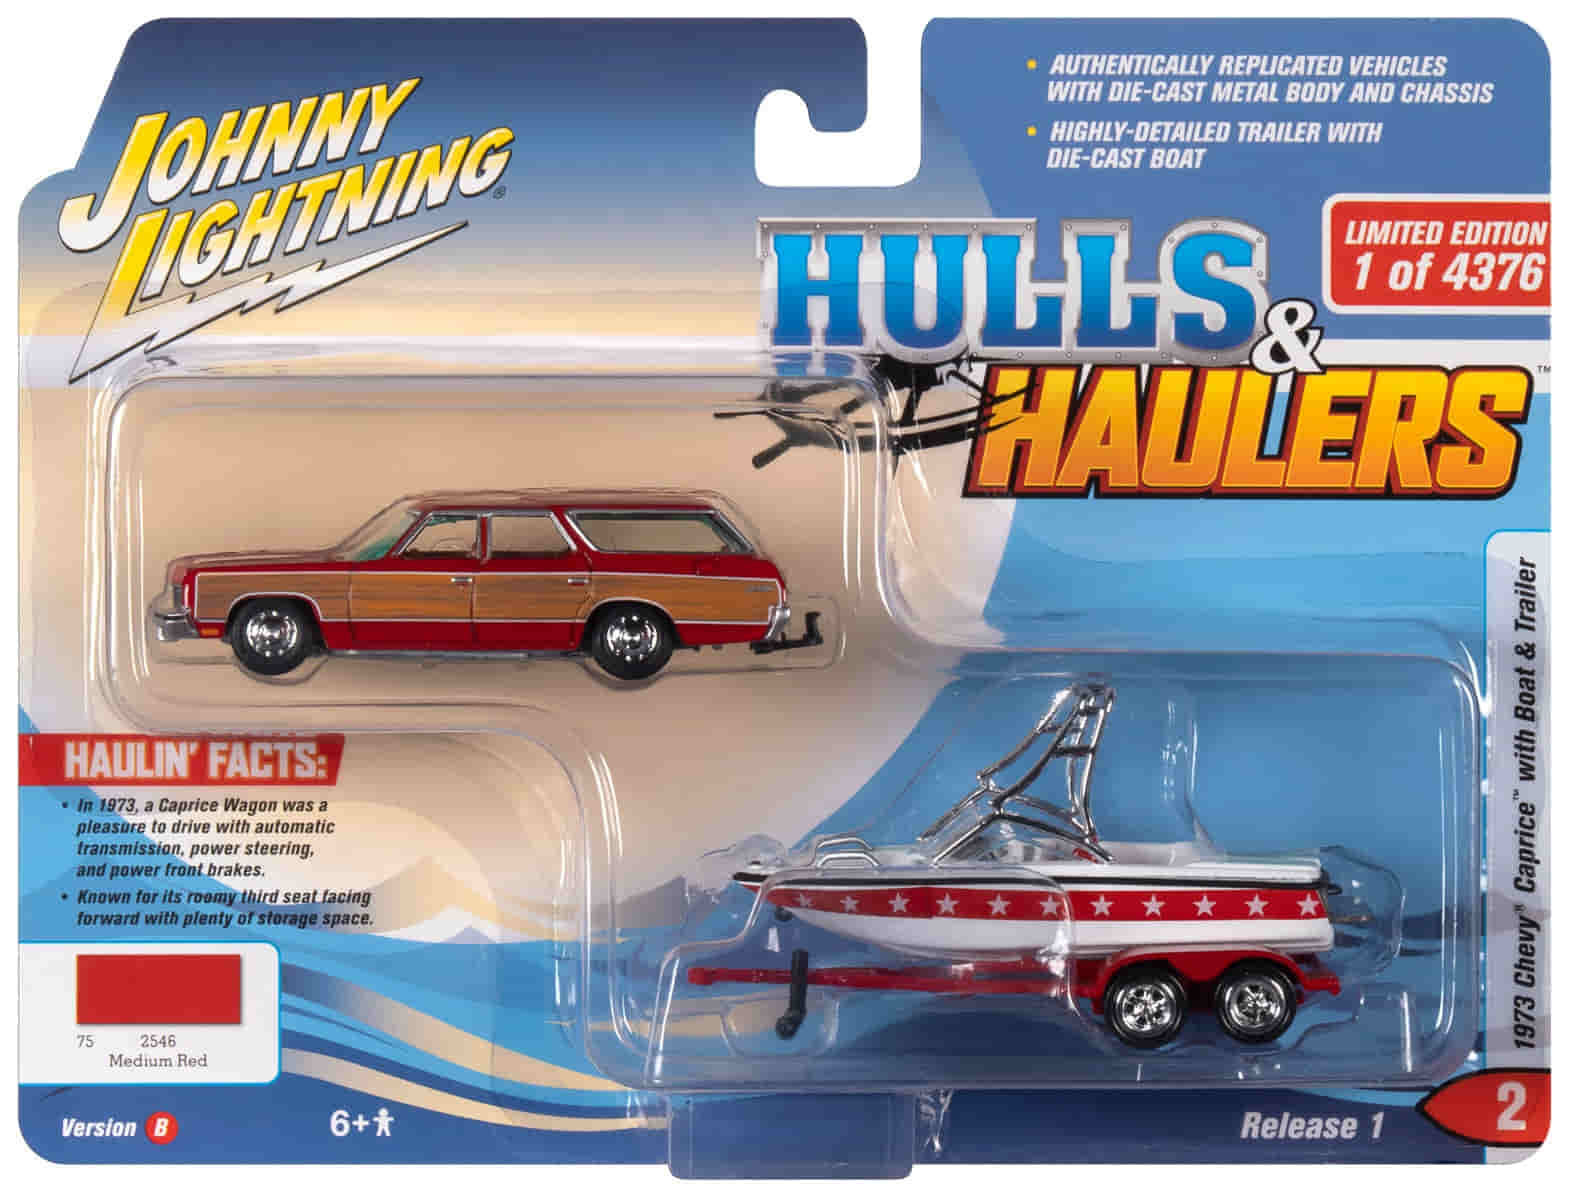 Johnny Lightning 1973 Chevrolet Caprice Wagon Medium Red with Woodgrain Sides with Mastercraft Boat and Trailer Limited Edition to 4376 Pieces